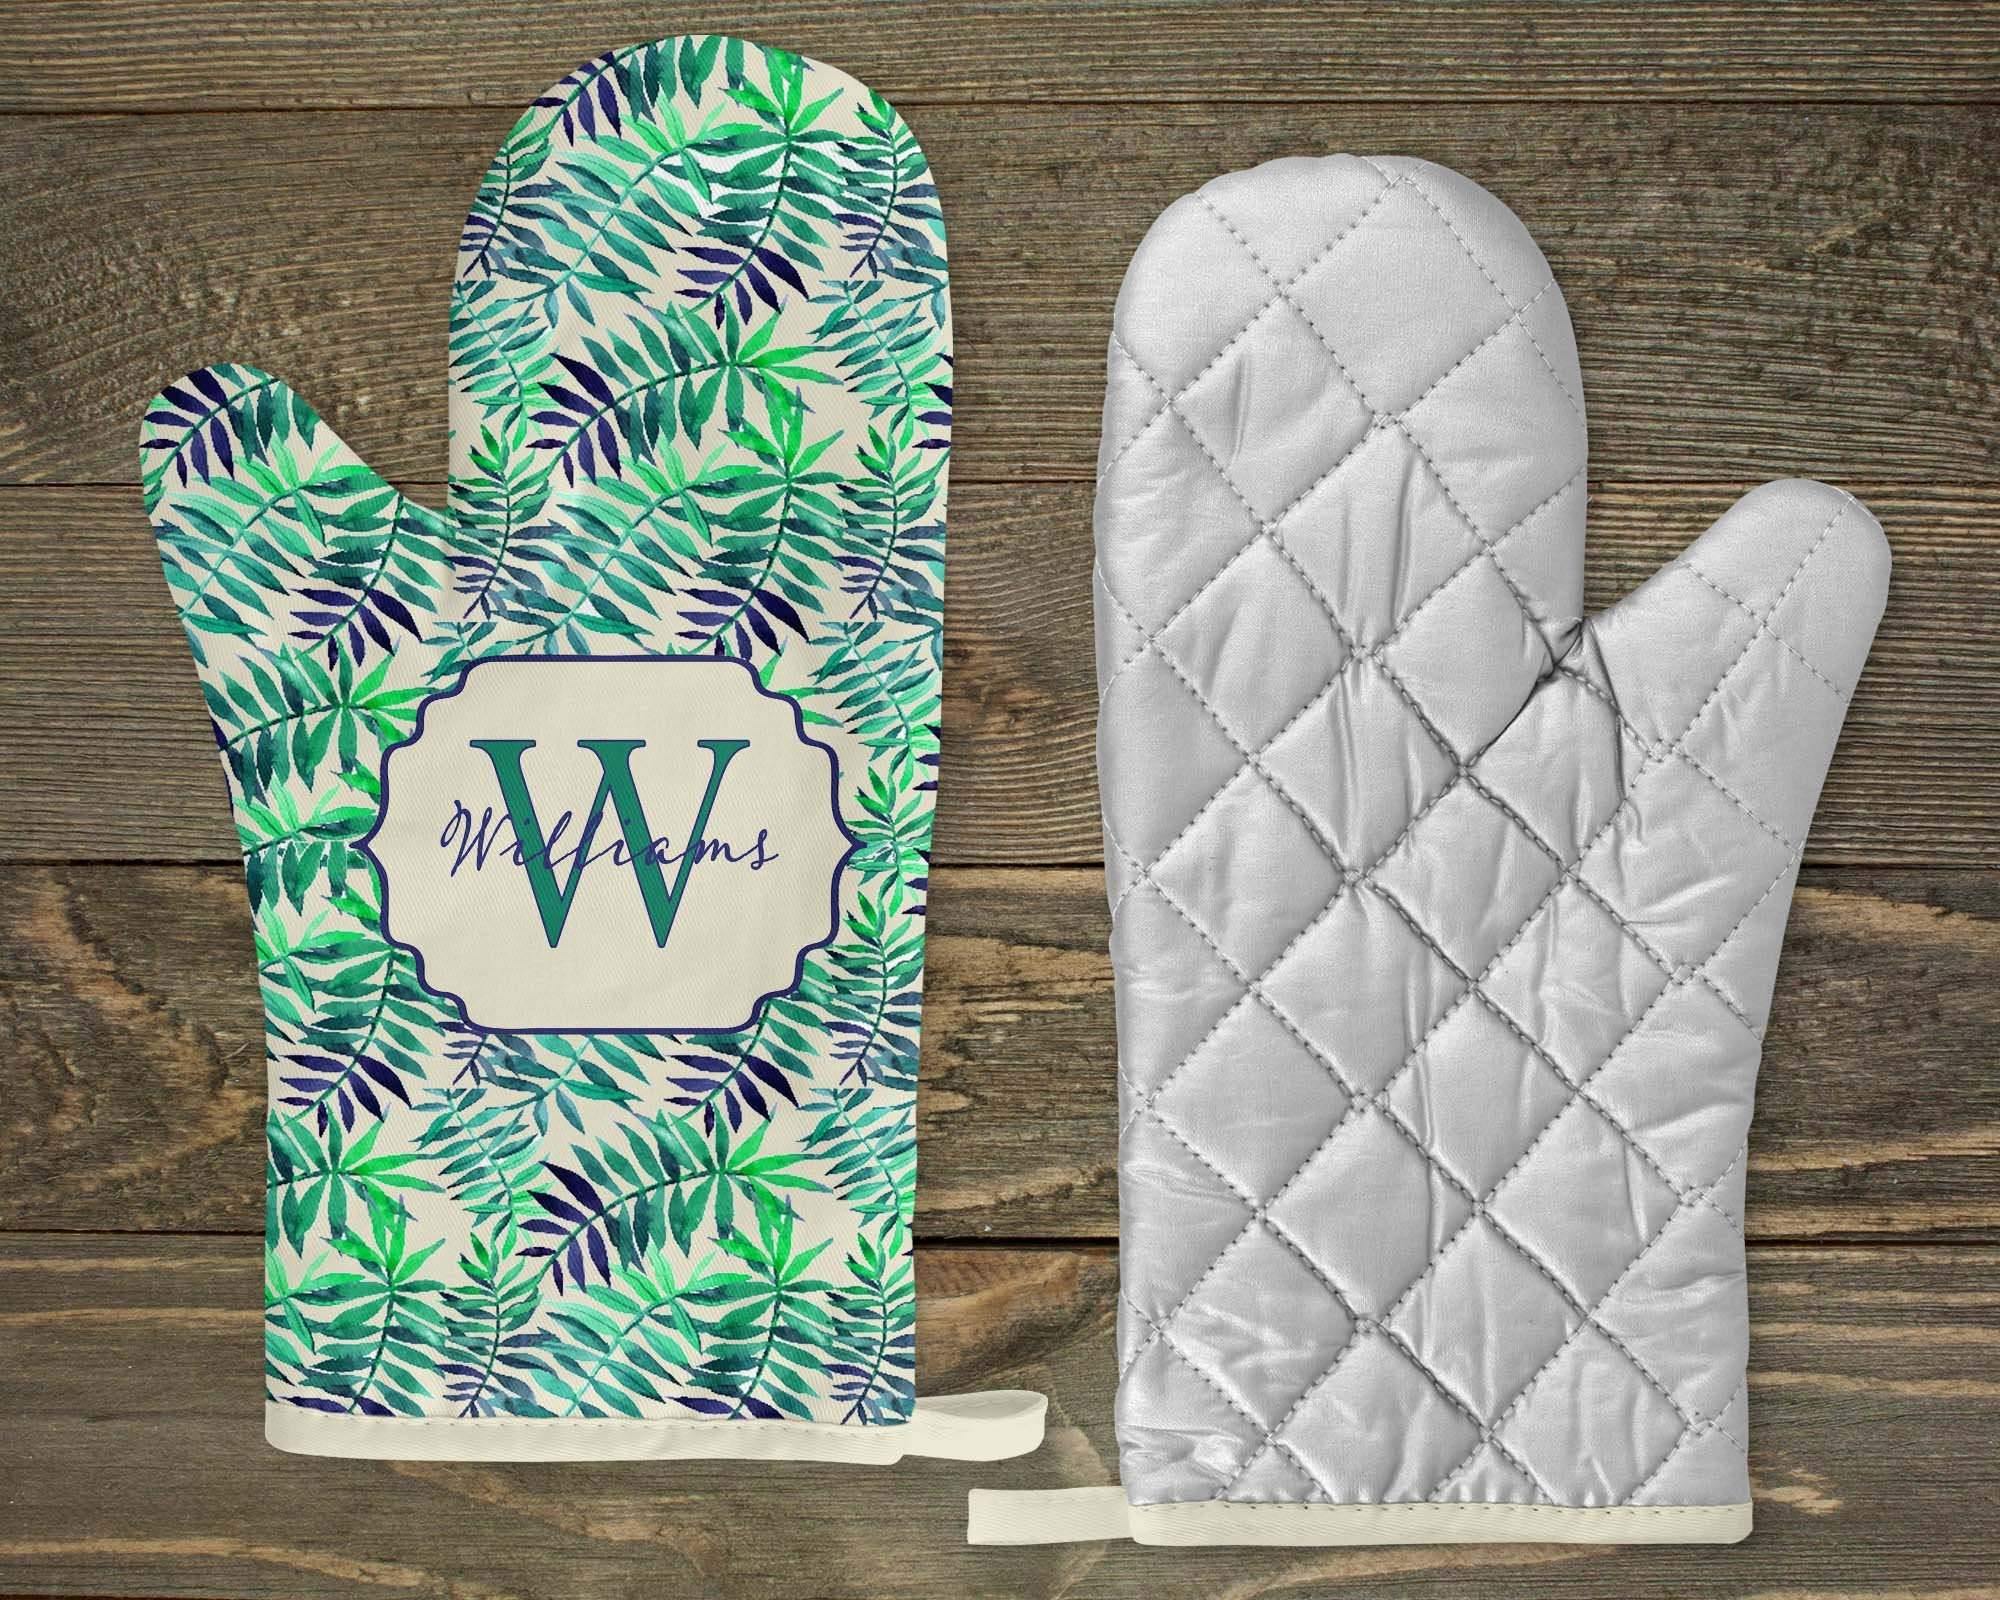 Personalized Oven Mitts | Custom Kitchen Decor | Blue and Green Fern - This & That Solutions - Personalized Oven Mitts | Custom Kitchen Decor | Blue and Green Fern - Personalized Gifts & Custom Home Decor